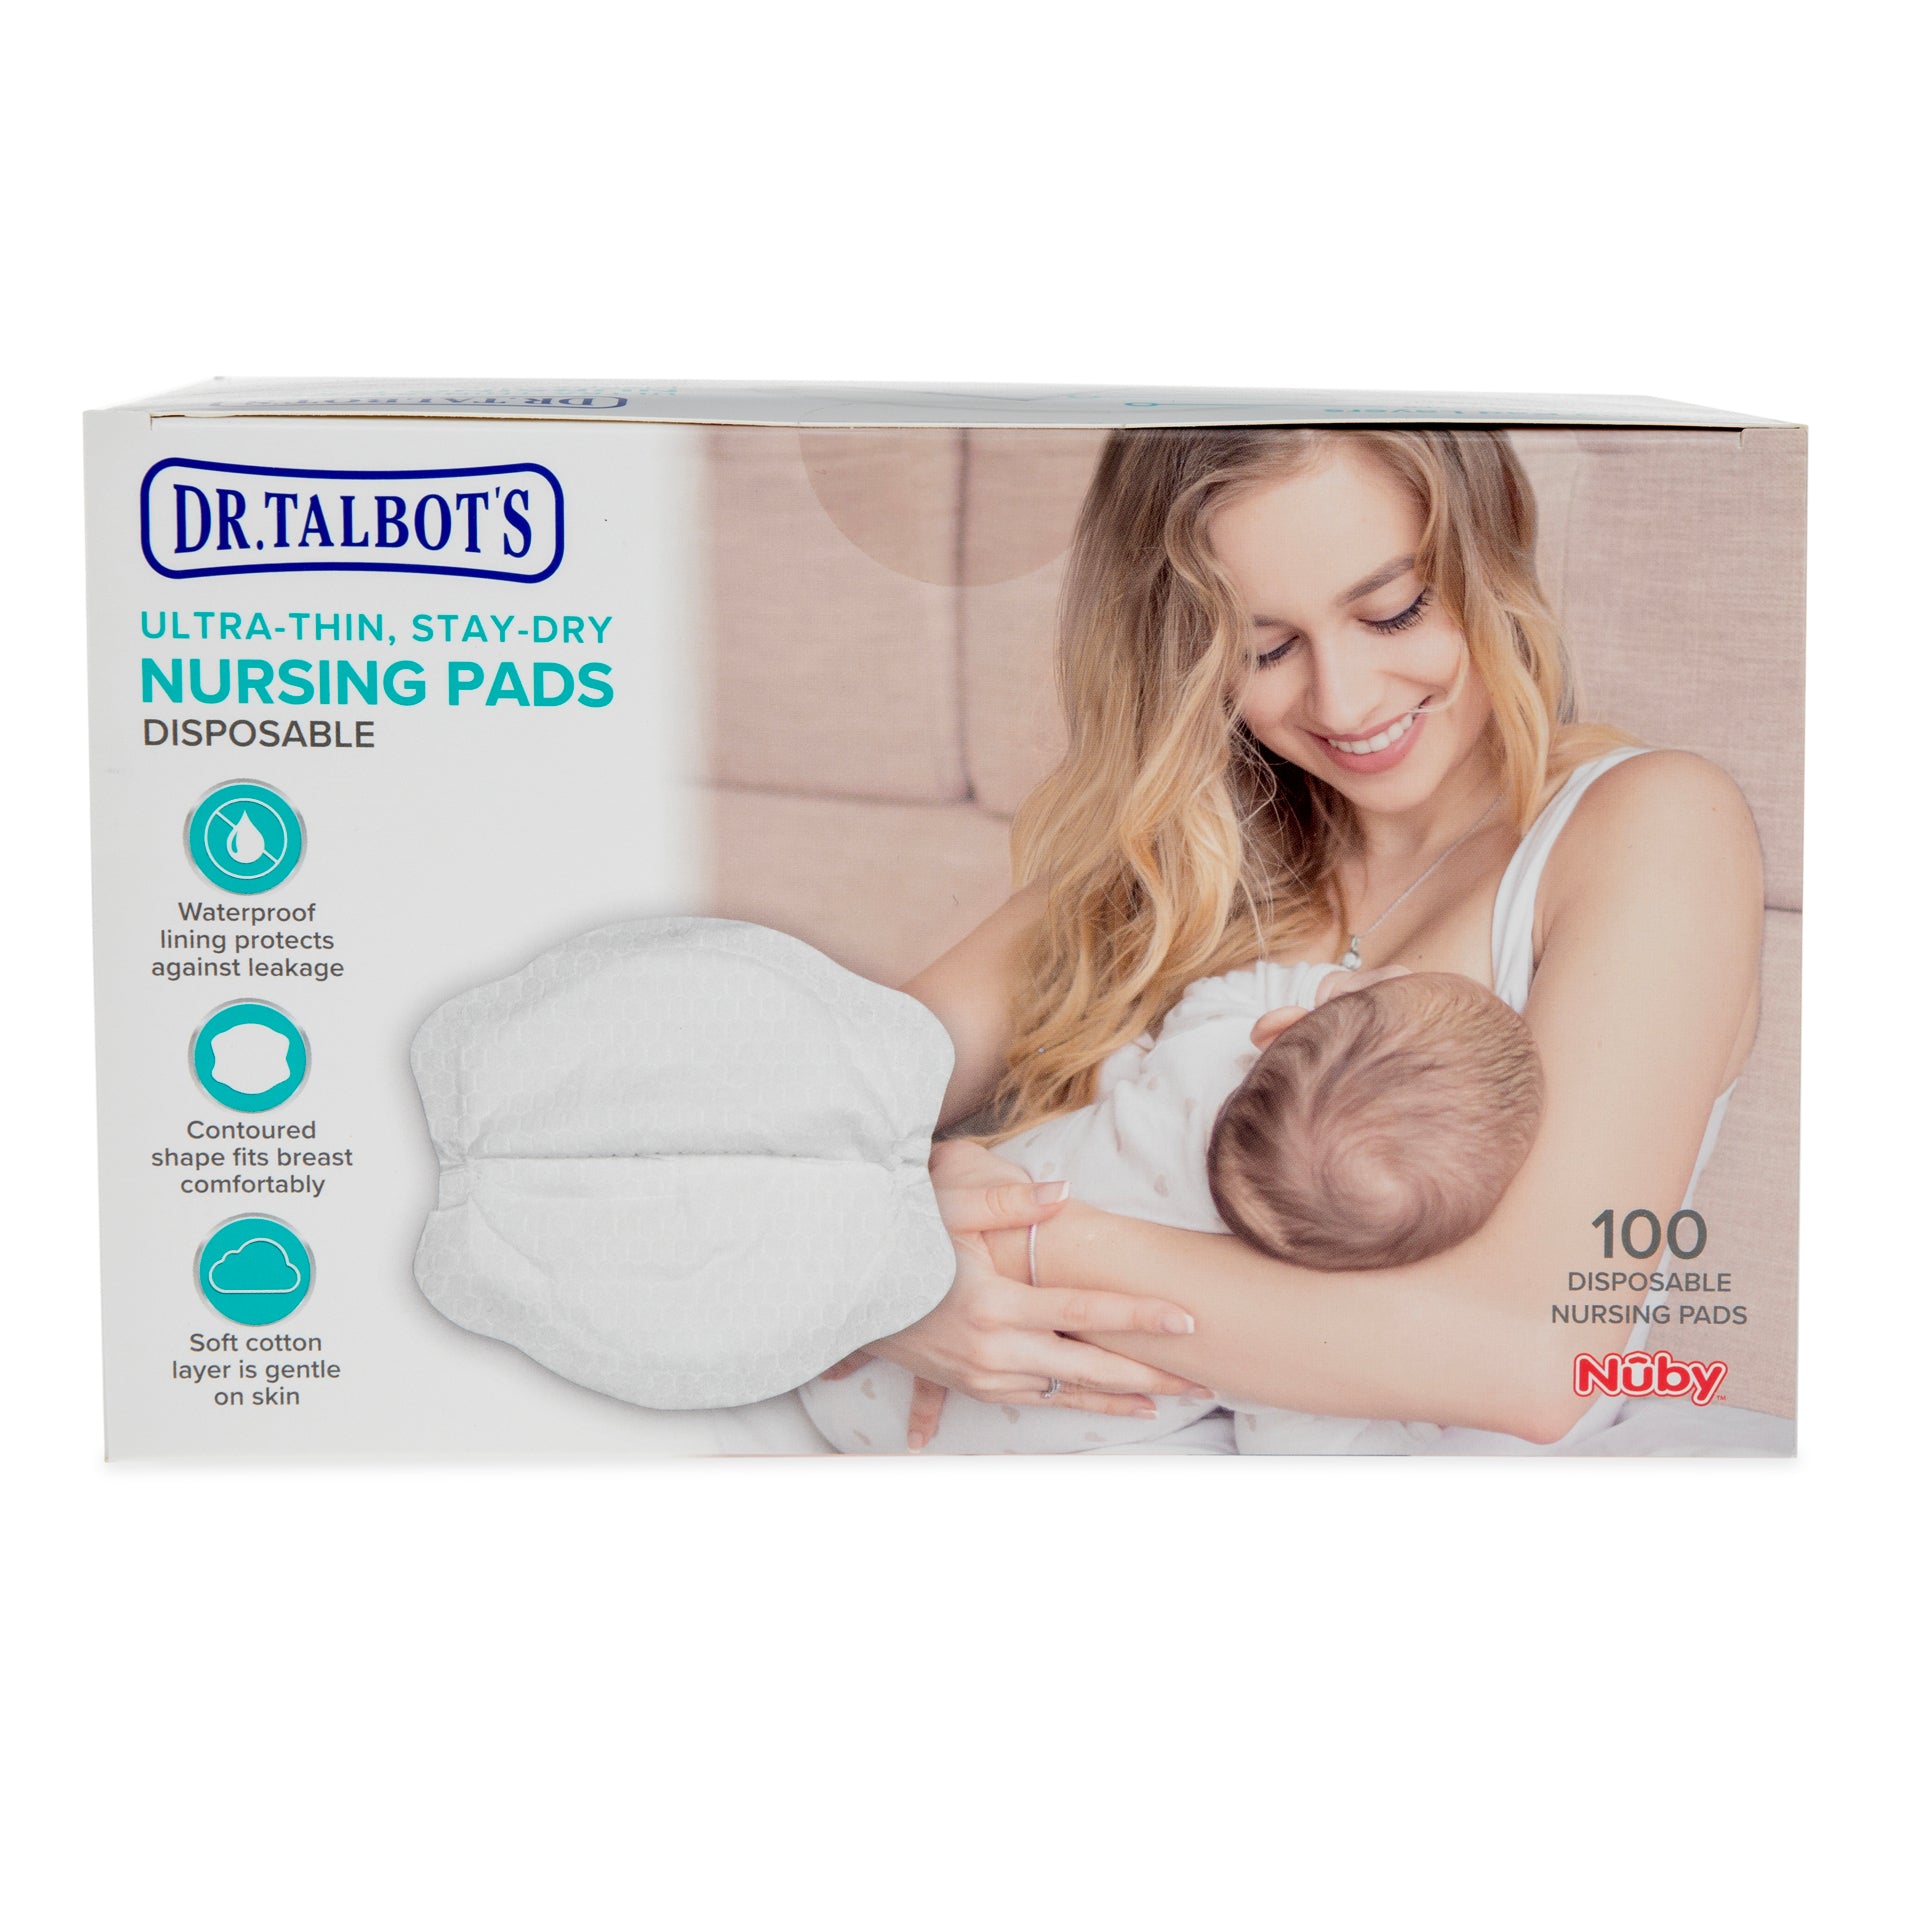 Pure Moms - Hydrogel Nipple Pads Pack of 10